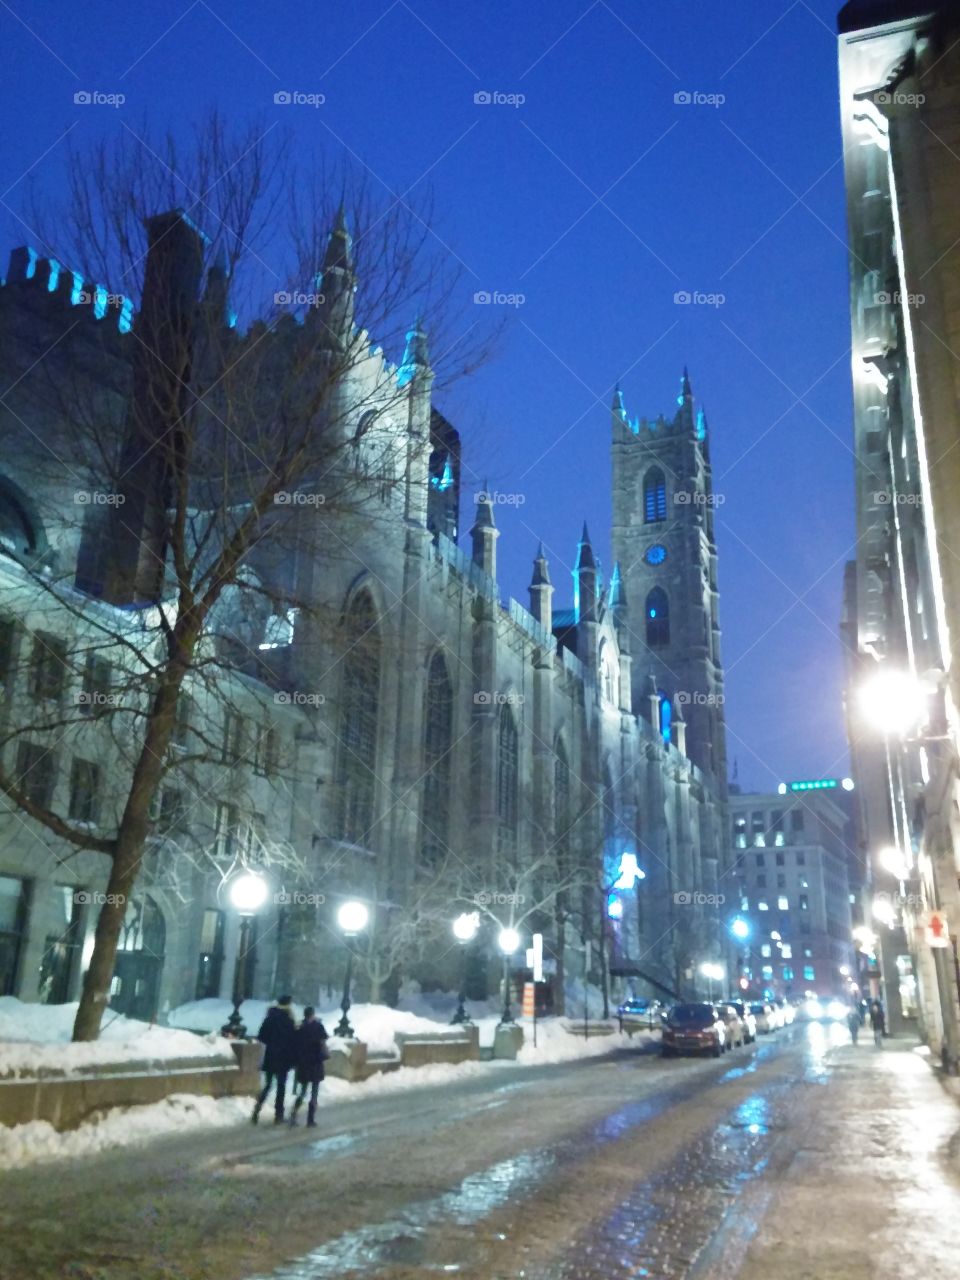 Notre-Dame Basilica. Absolutely gorgeous massive cathedral